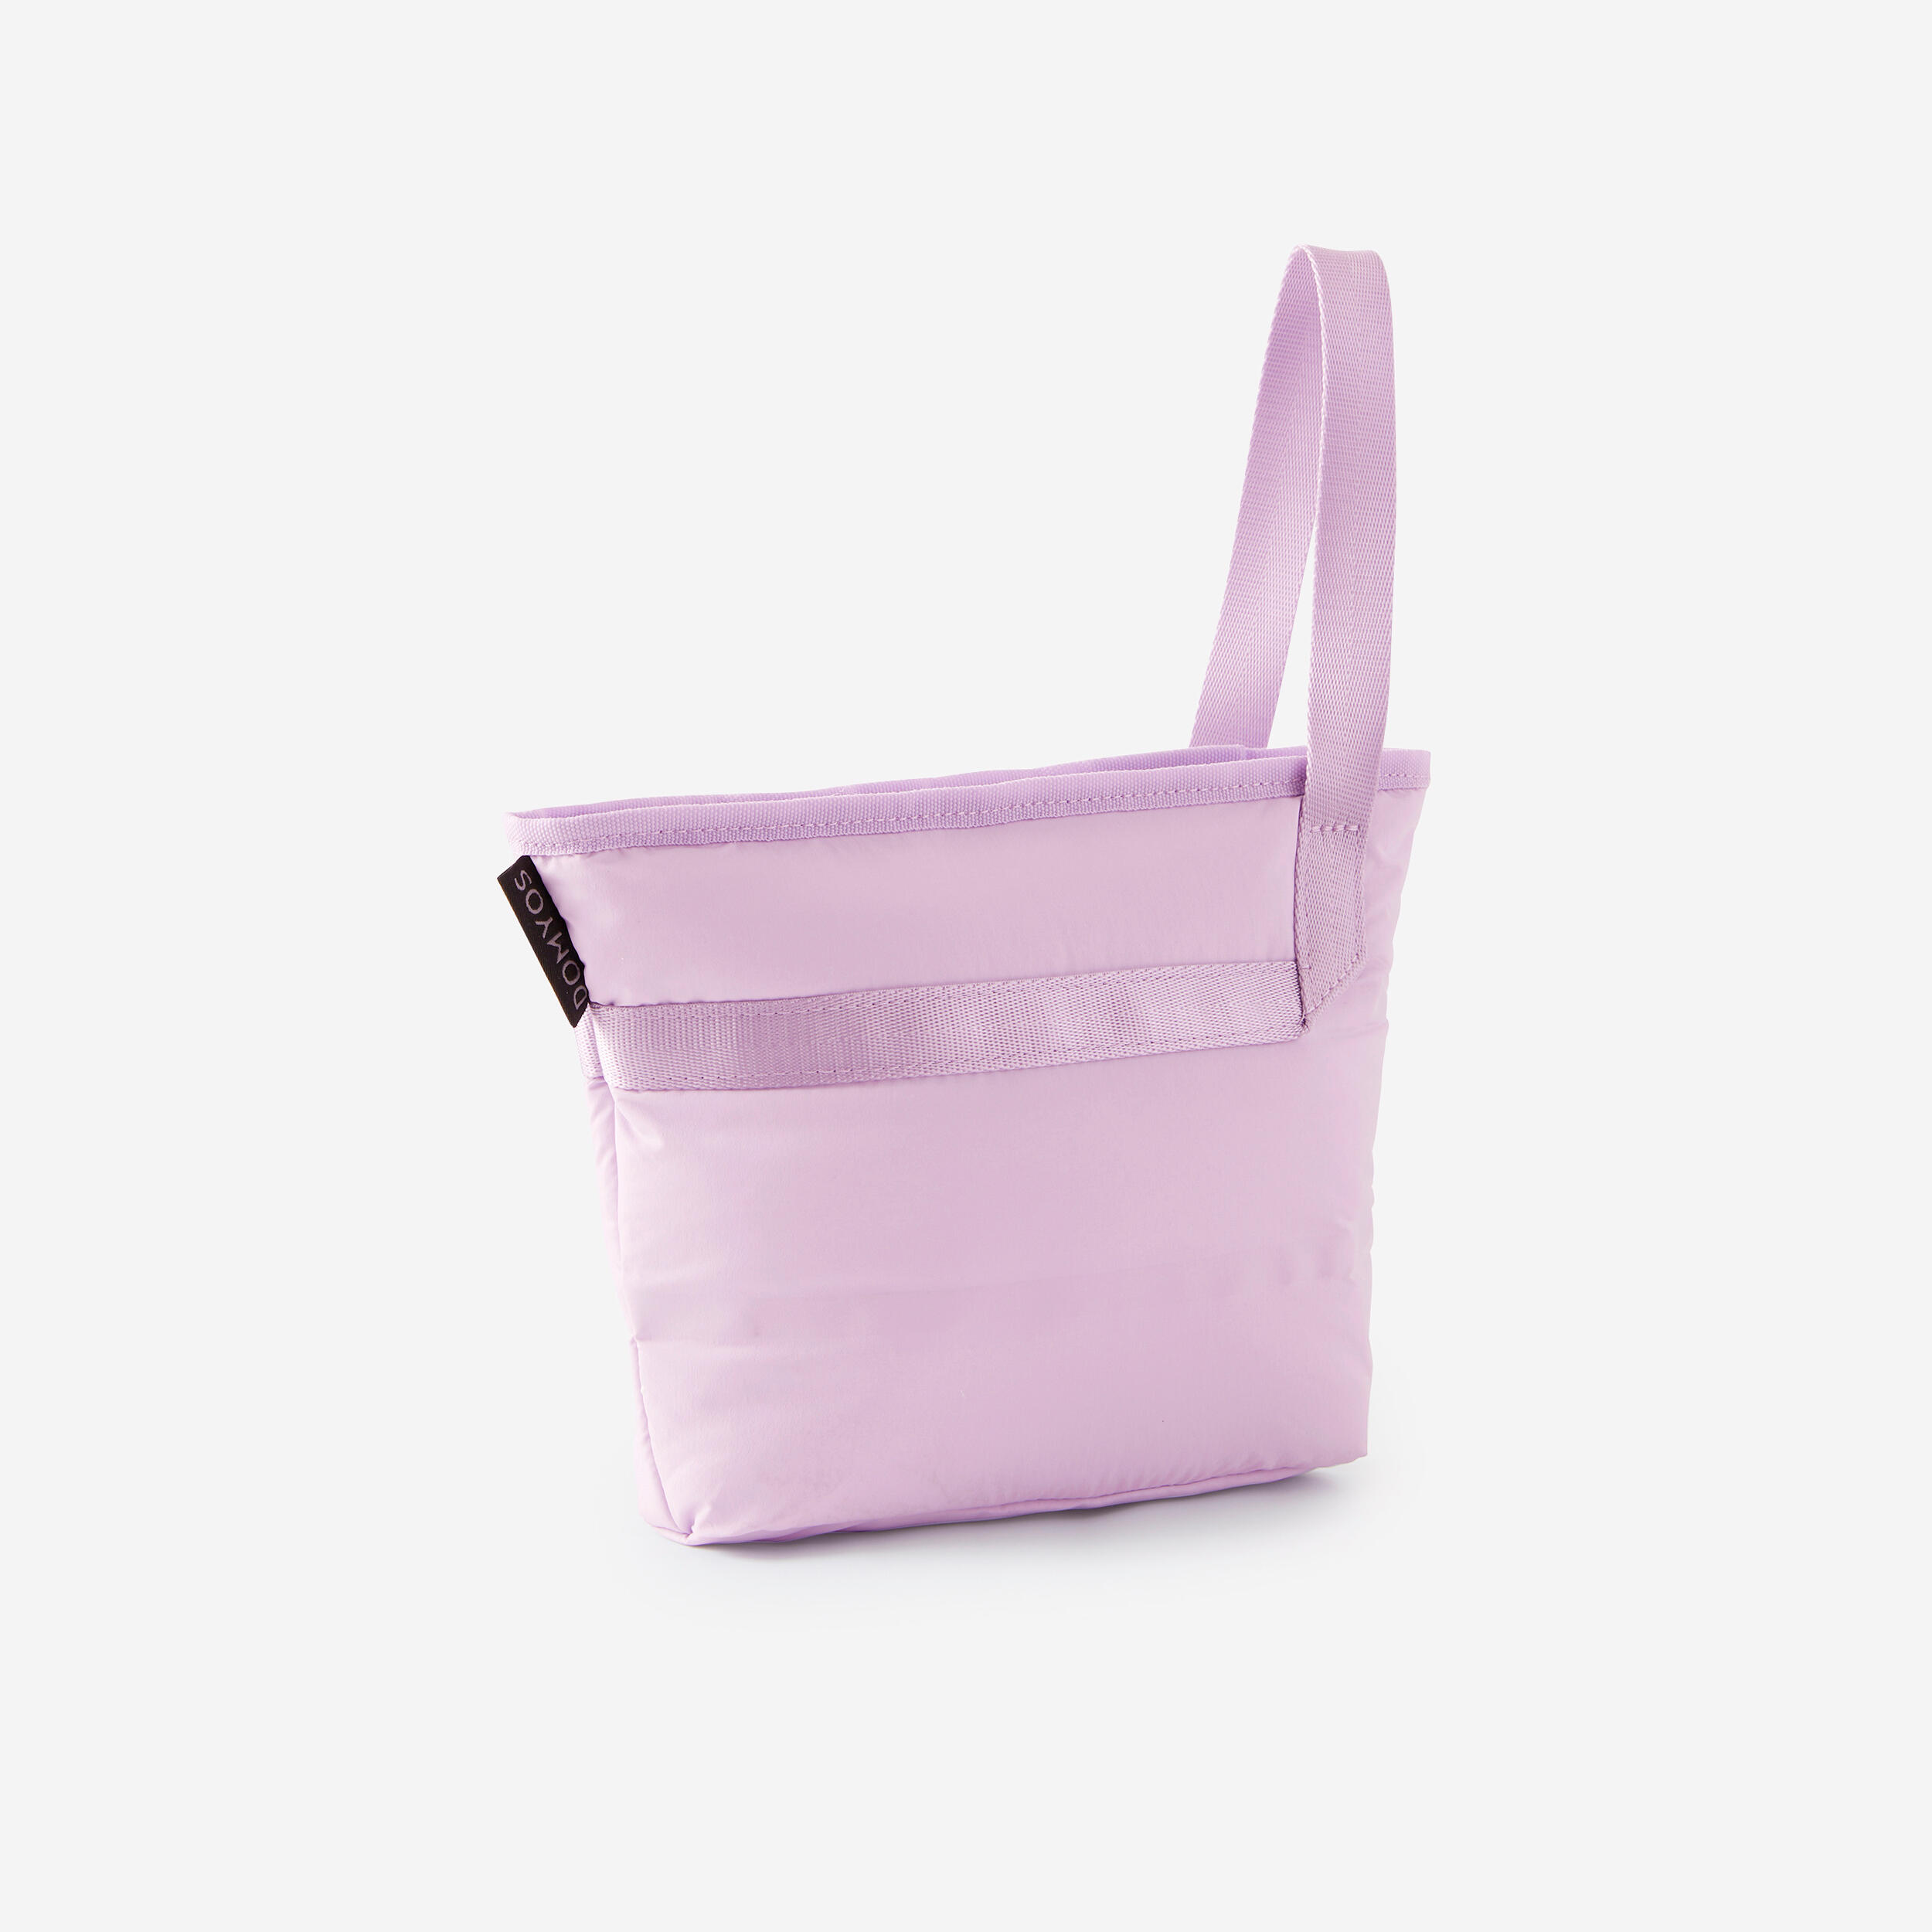 Sports Bag Padded Pouch - Violet 6/7